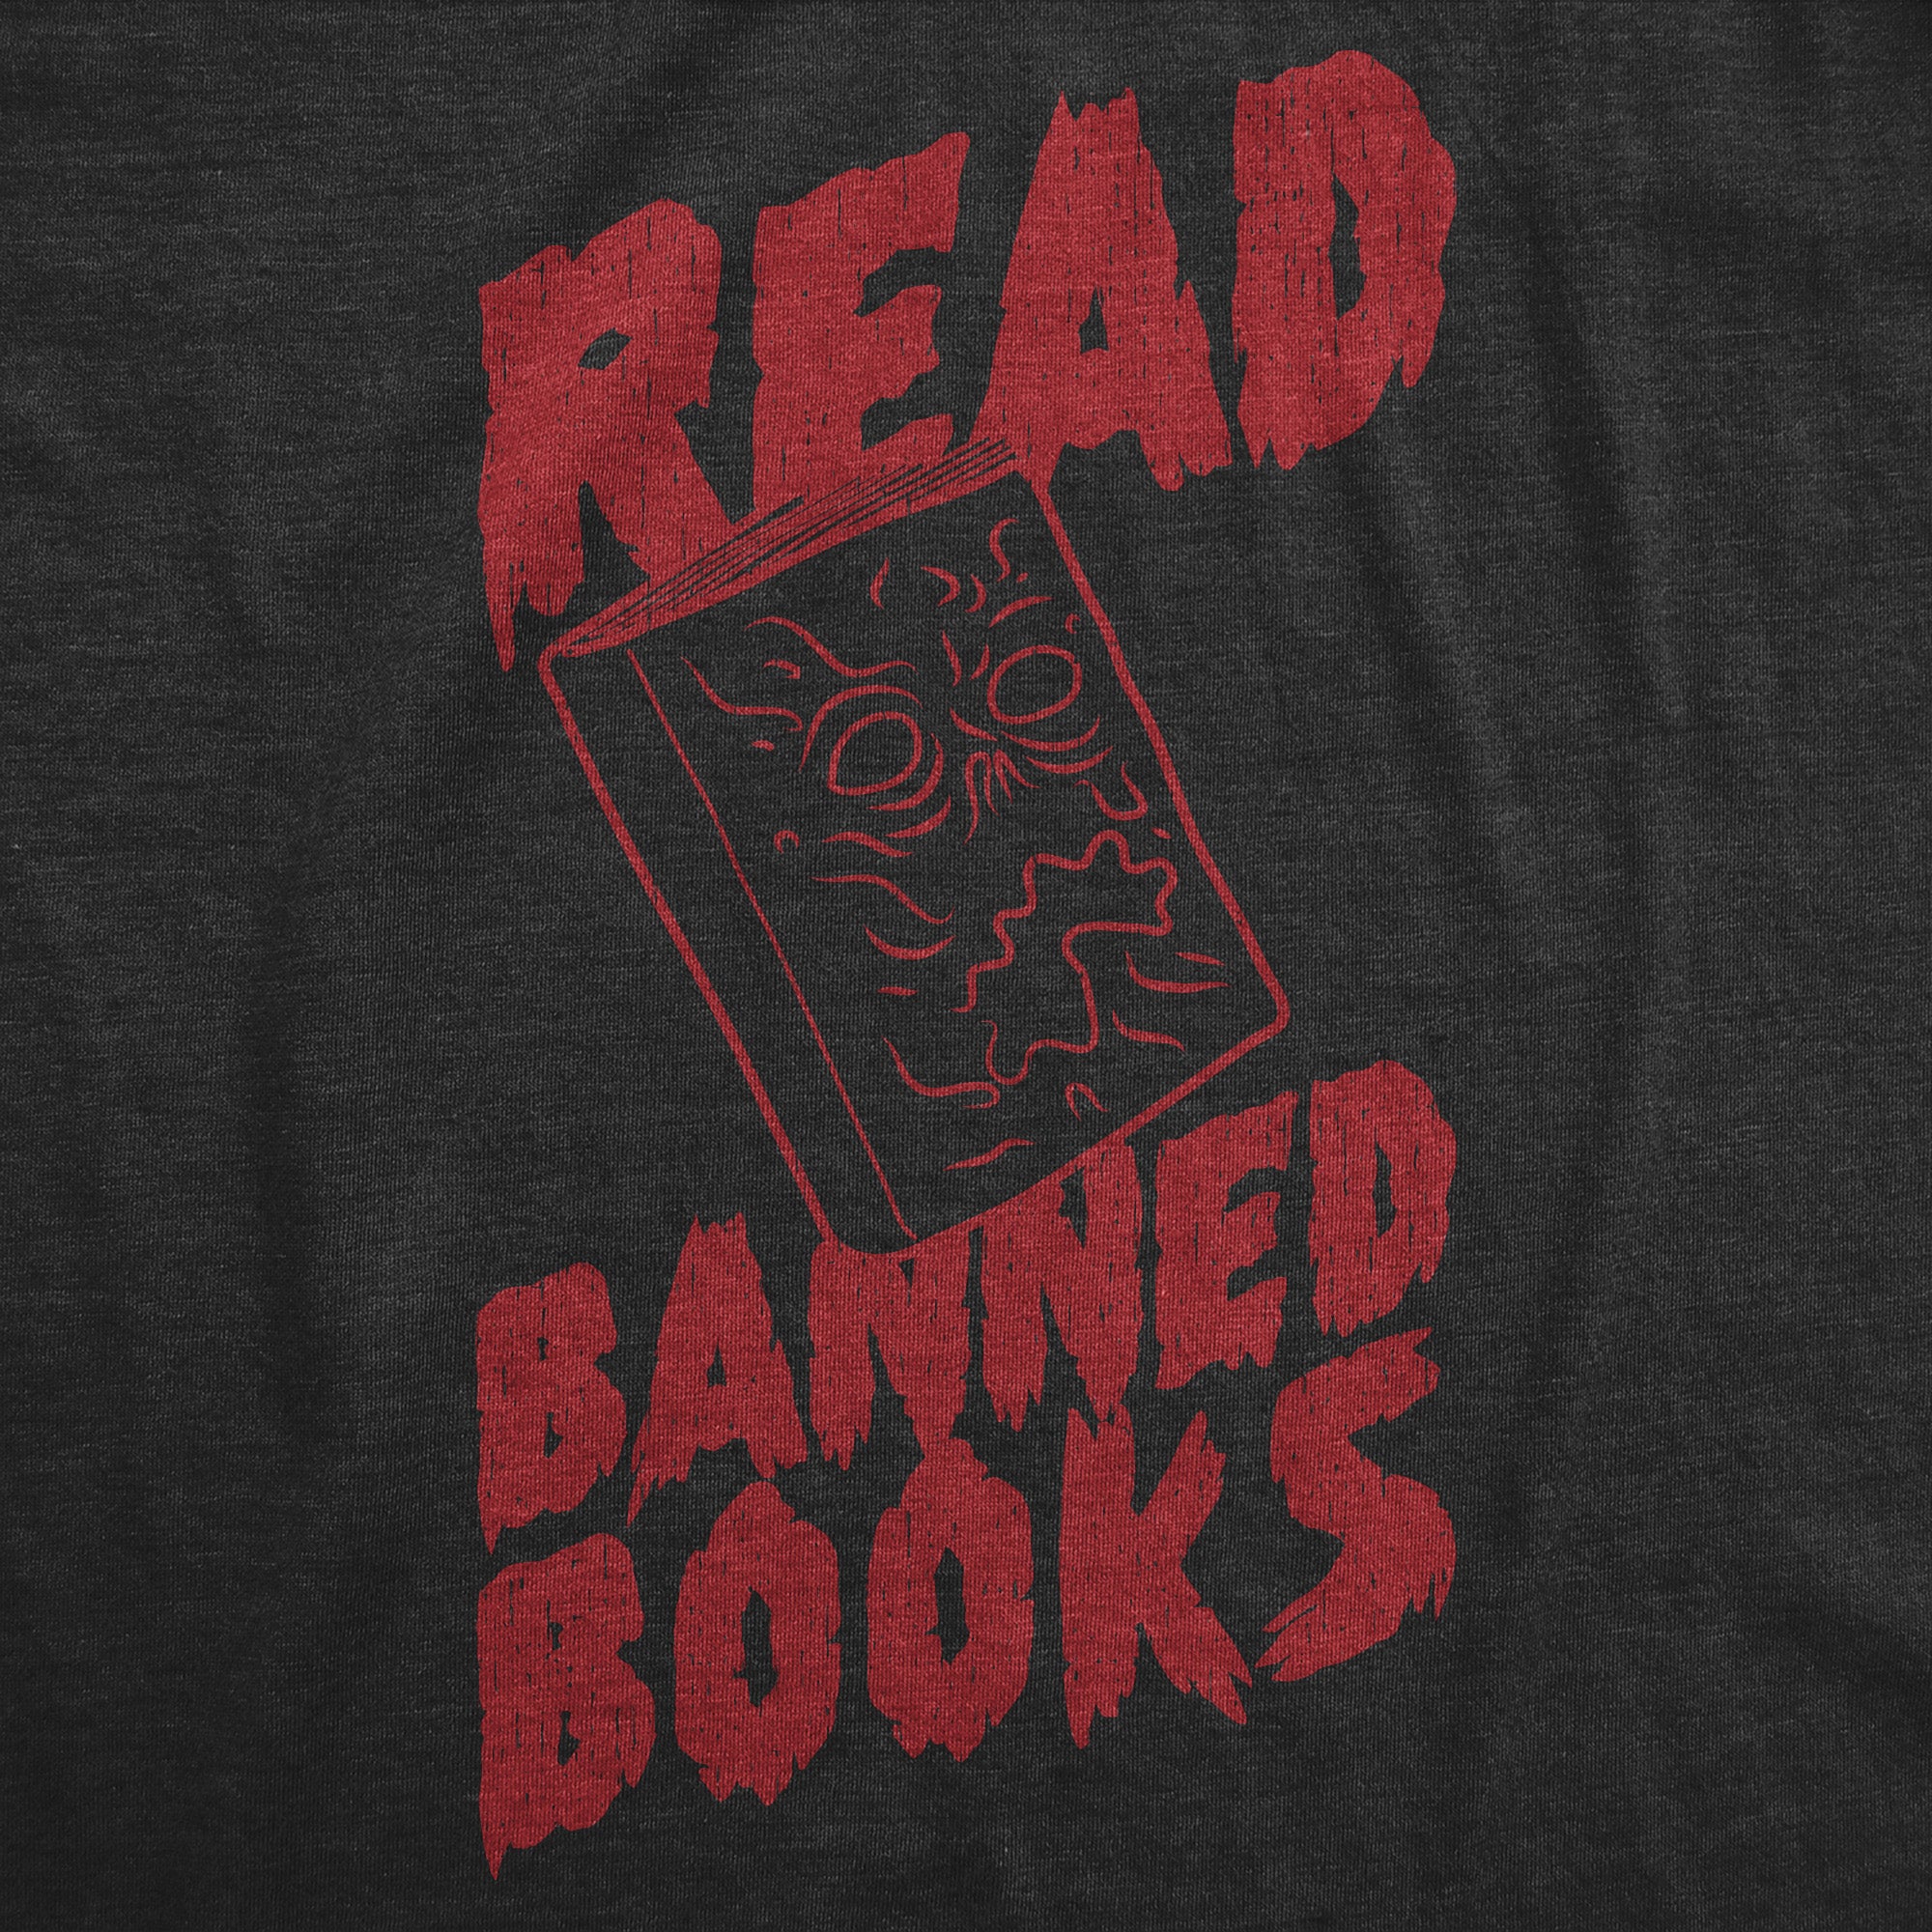 Funny Heather Black - Read Banned Books Read Banned Books Mens T Shirt Nerdy sarcastic Tee